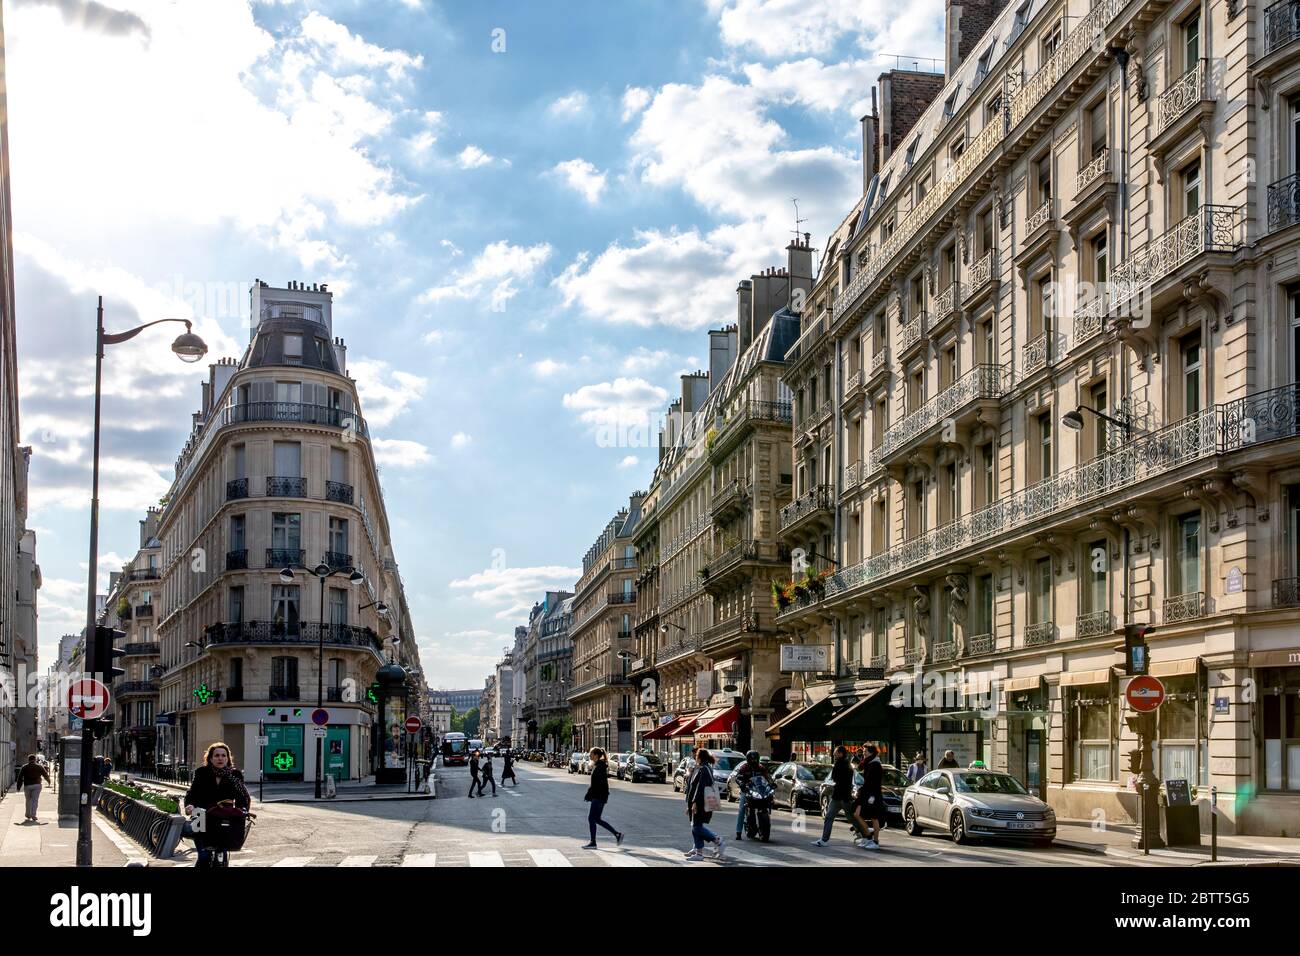 Paris, France - May 14, 2020: Typical haussmann buildings in Paris on the right Bank of the River Seine (Reaumur street) during containment measures d Stock Photo